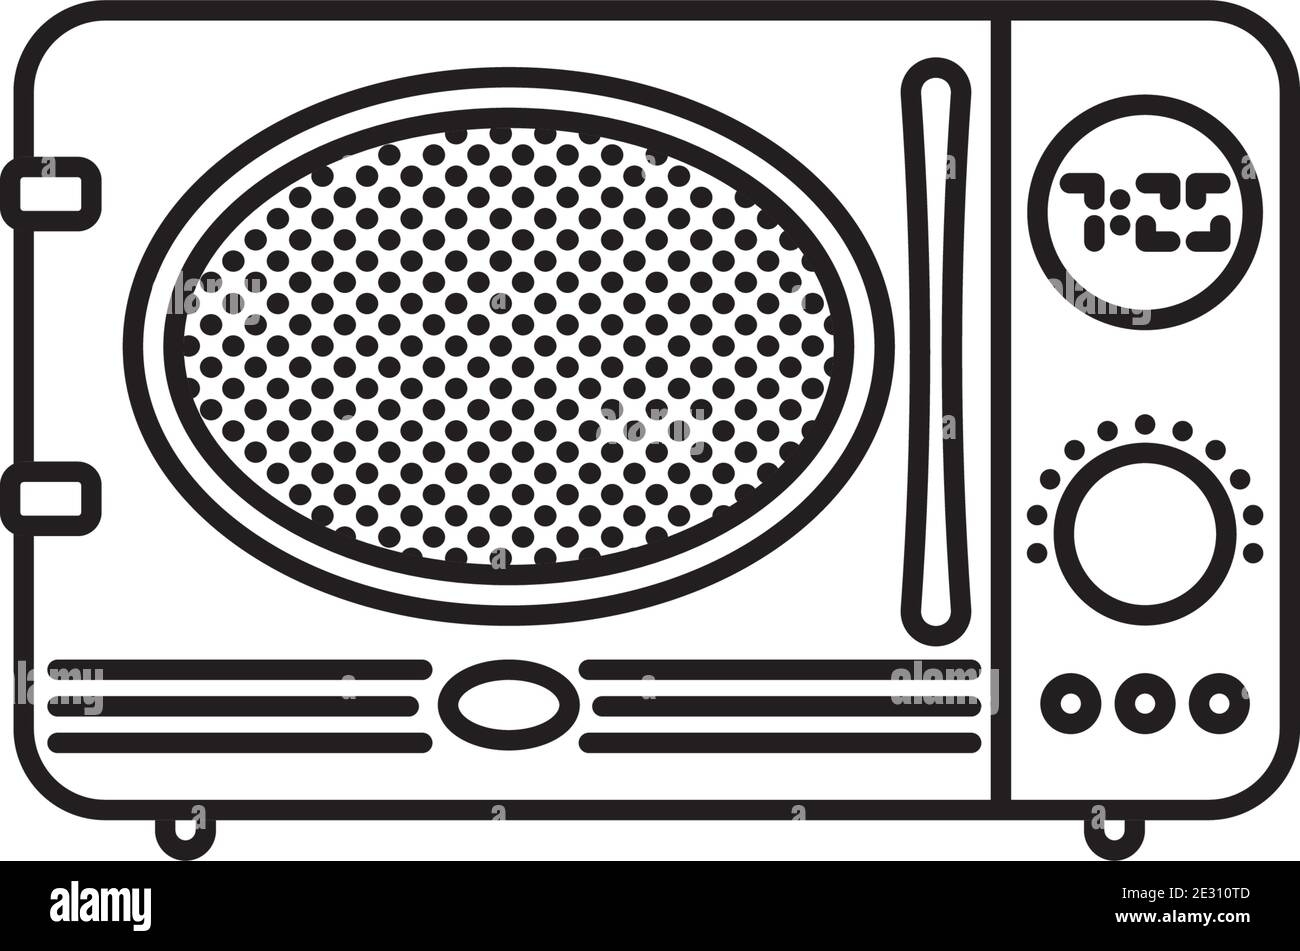 Retro style microwave oven vector line icon for TV Dinner Day on September 10 Stock Vector